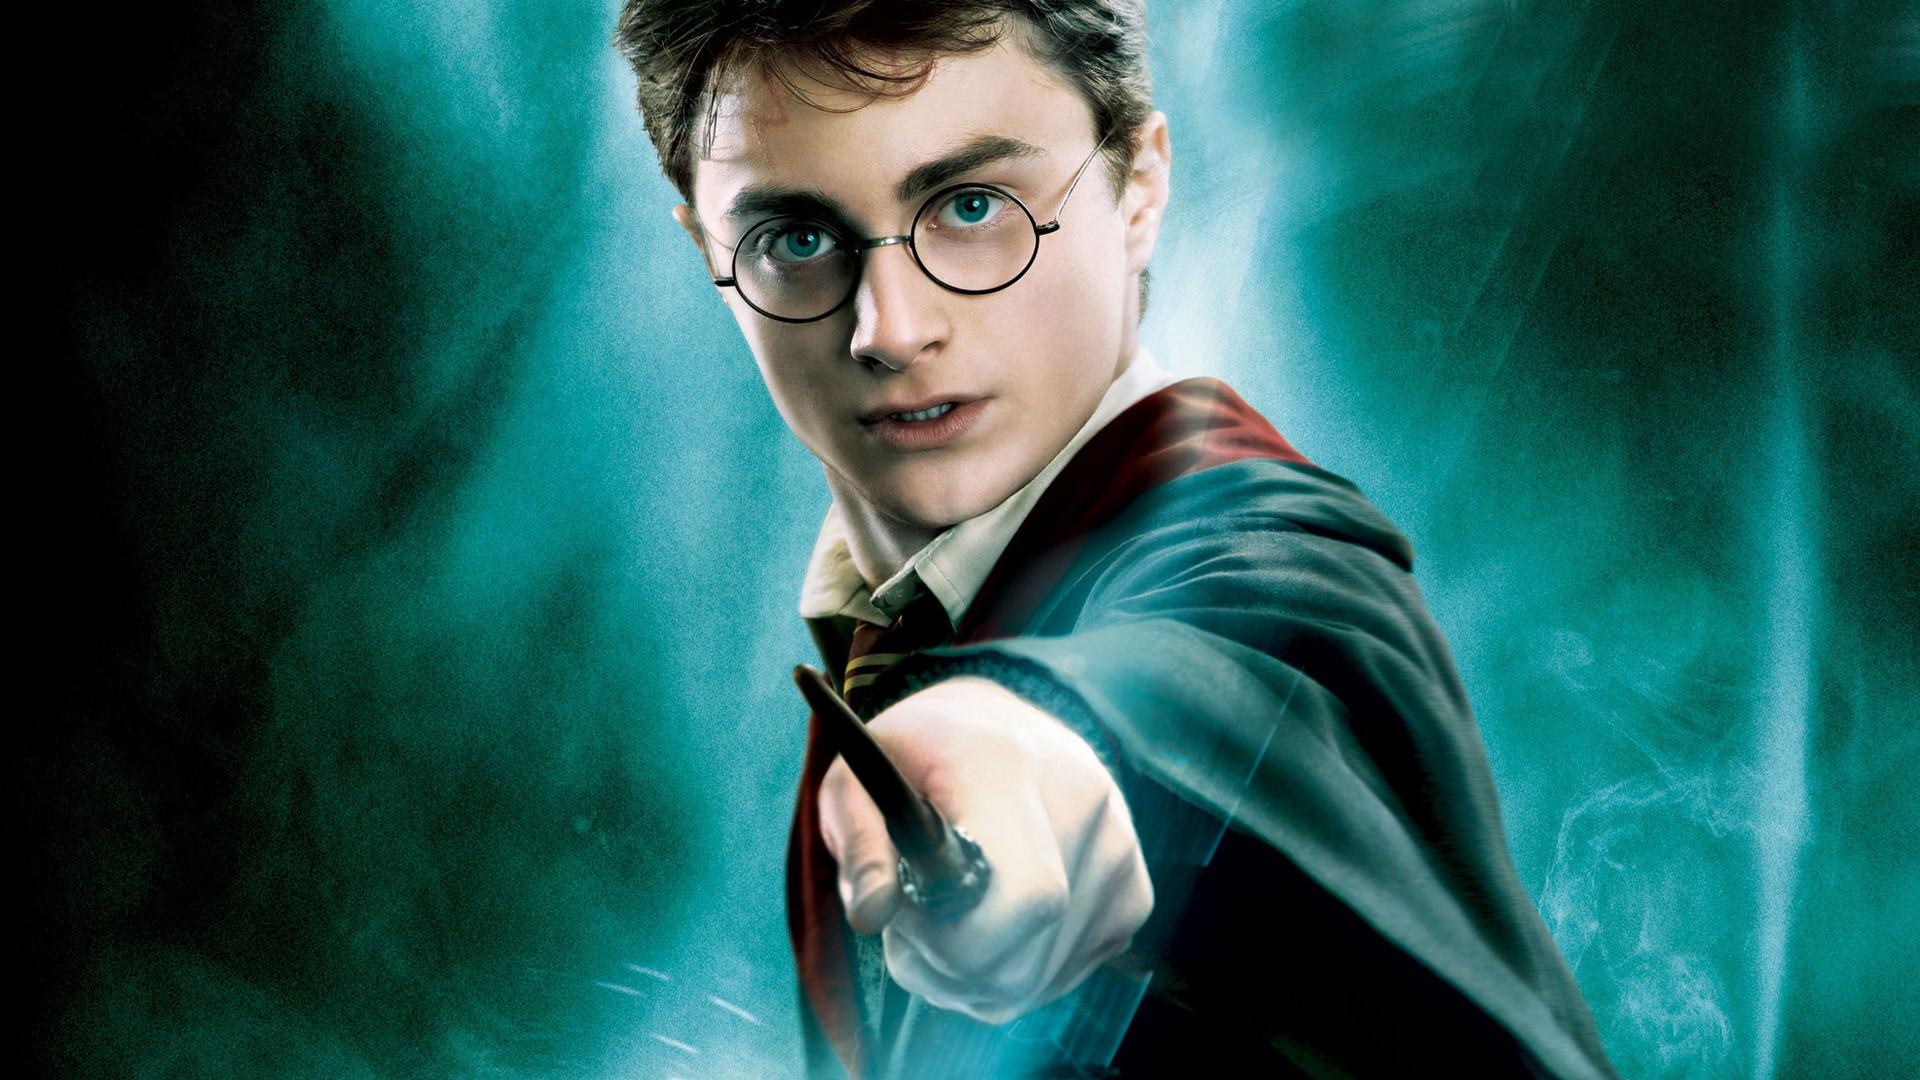 Harry Potter Becoming a TV Series? Warner Bros. Comes With Good News for Fans